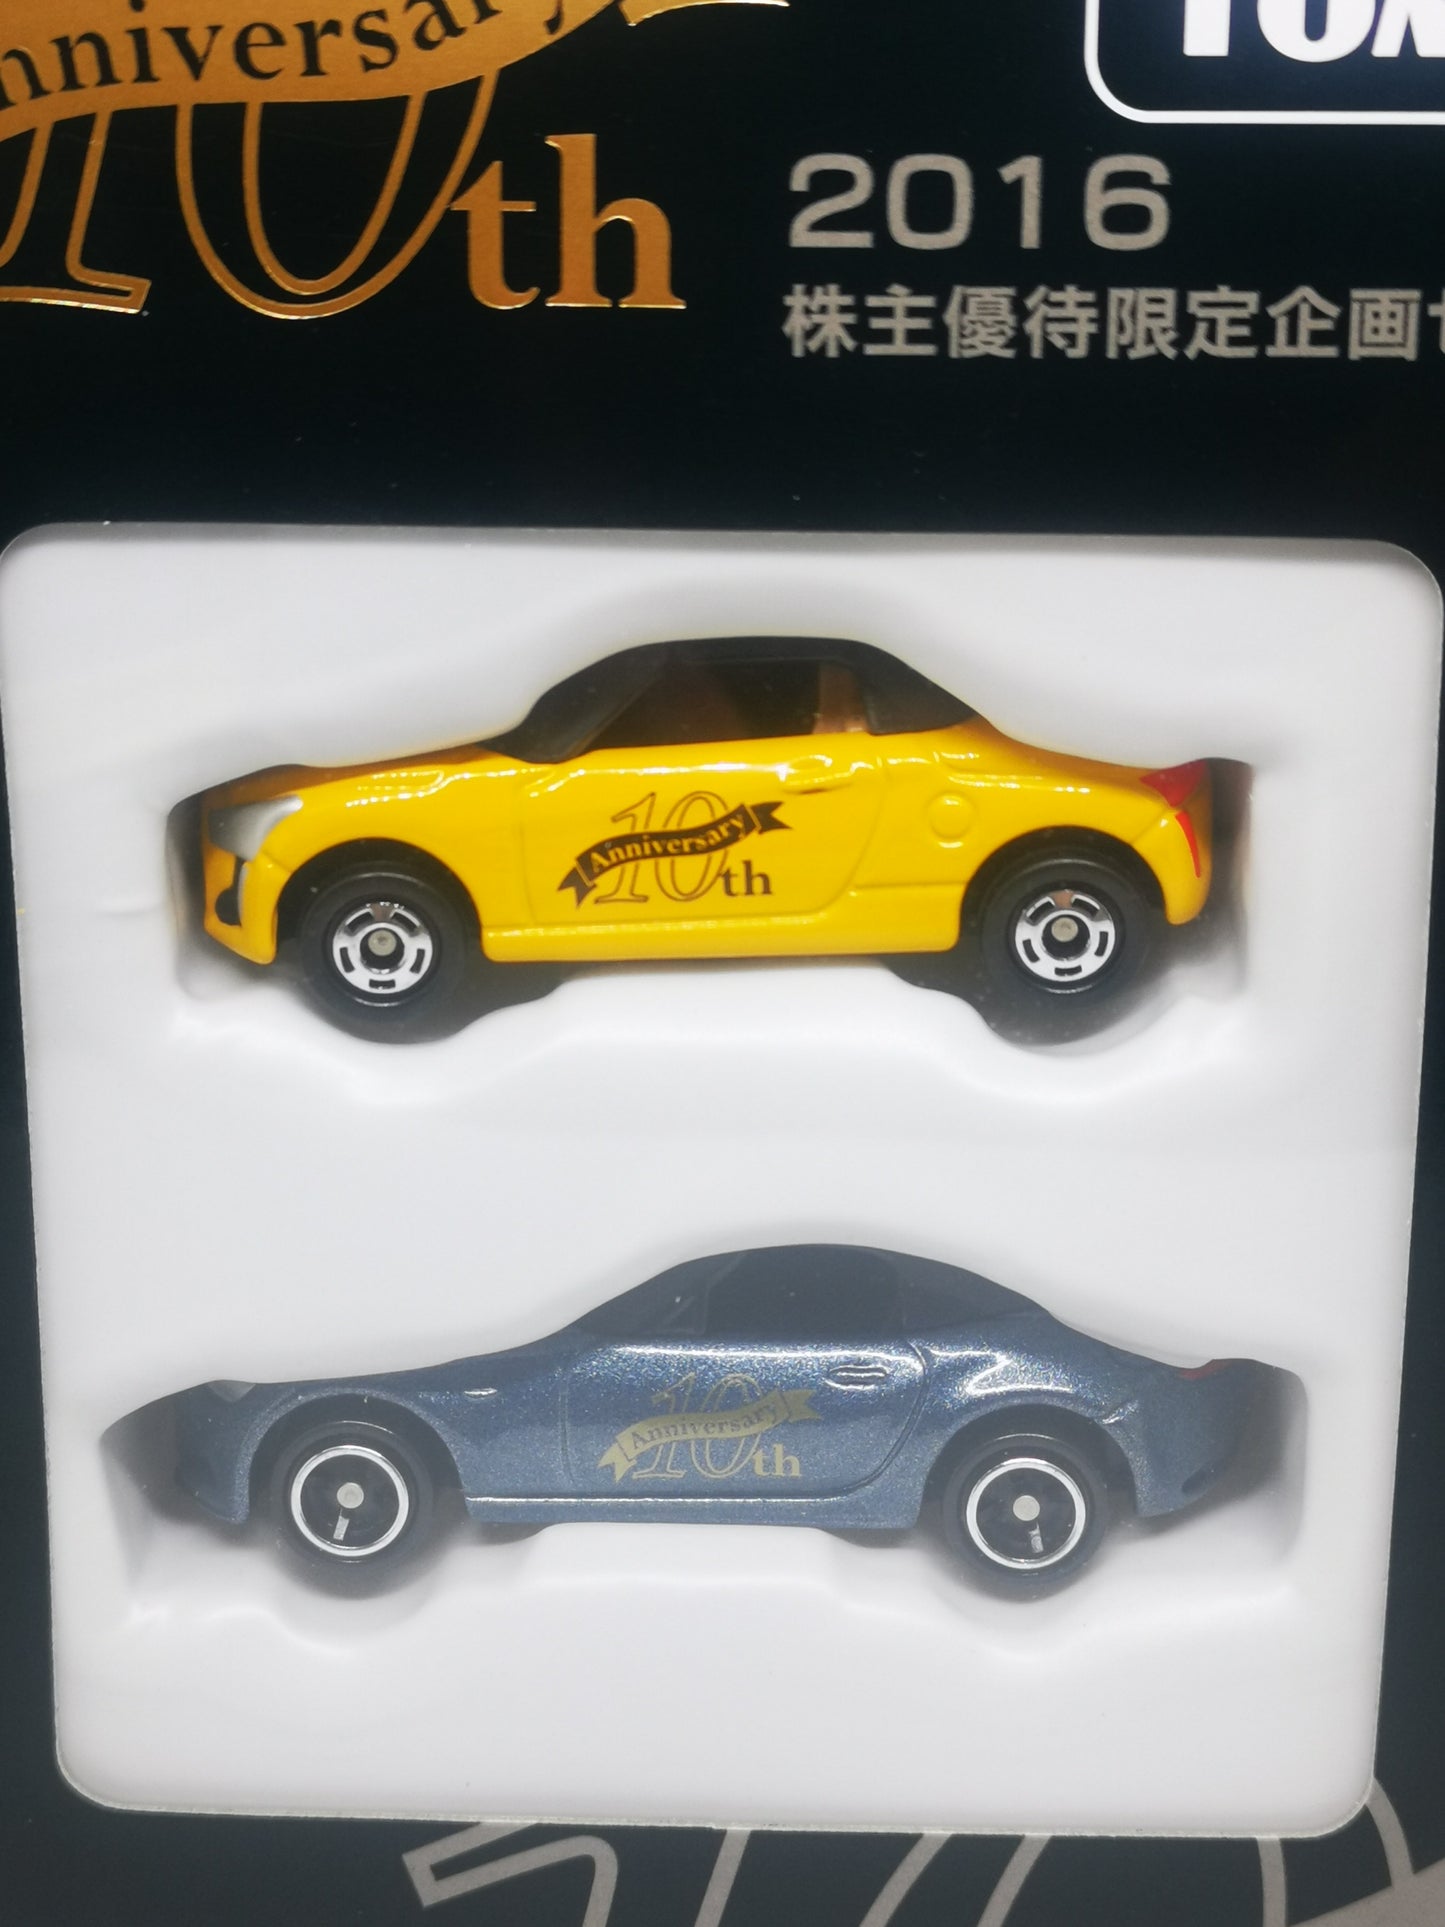 Tomica 10th Anniversary Gift for the 2016 Takara Tomy Stock Holder in Japan